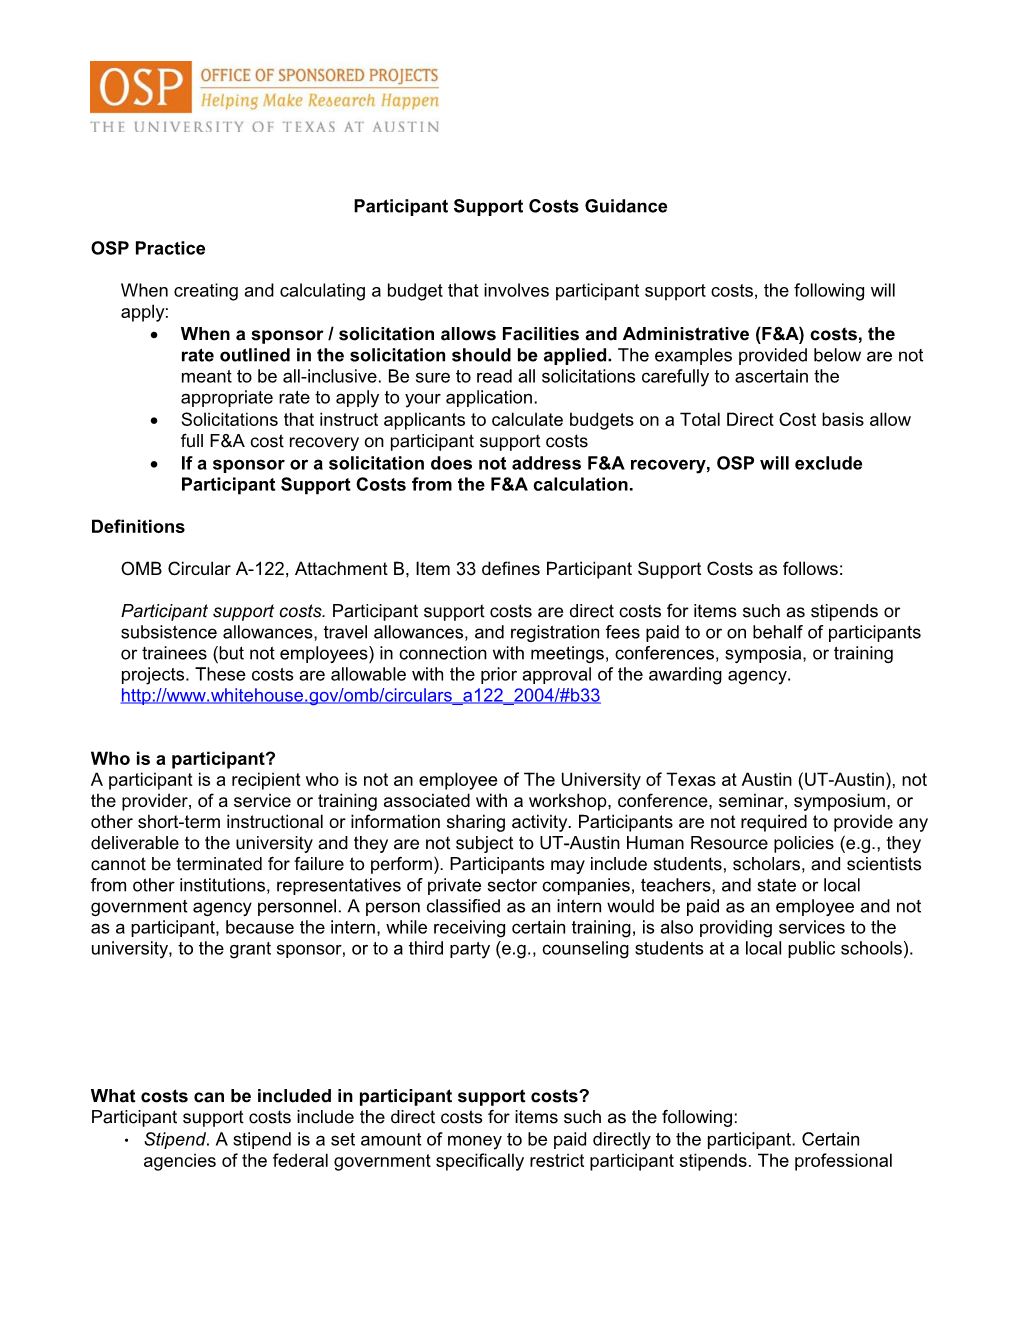 Participant Support Costs Guidance